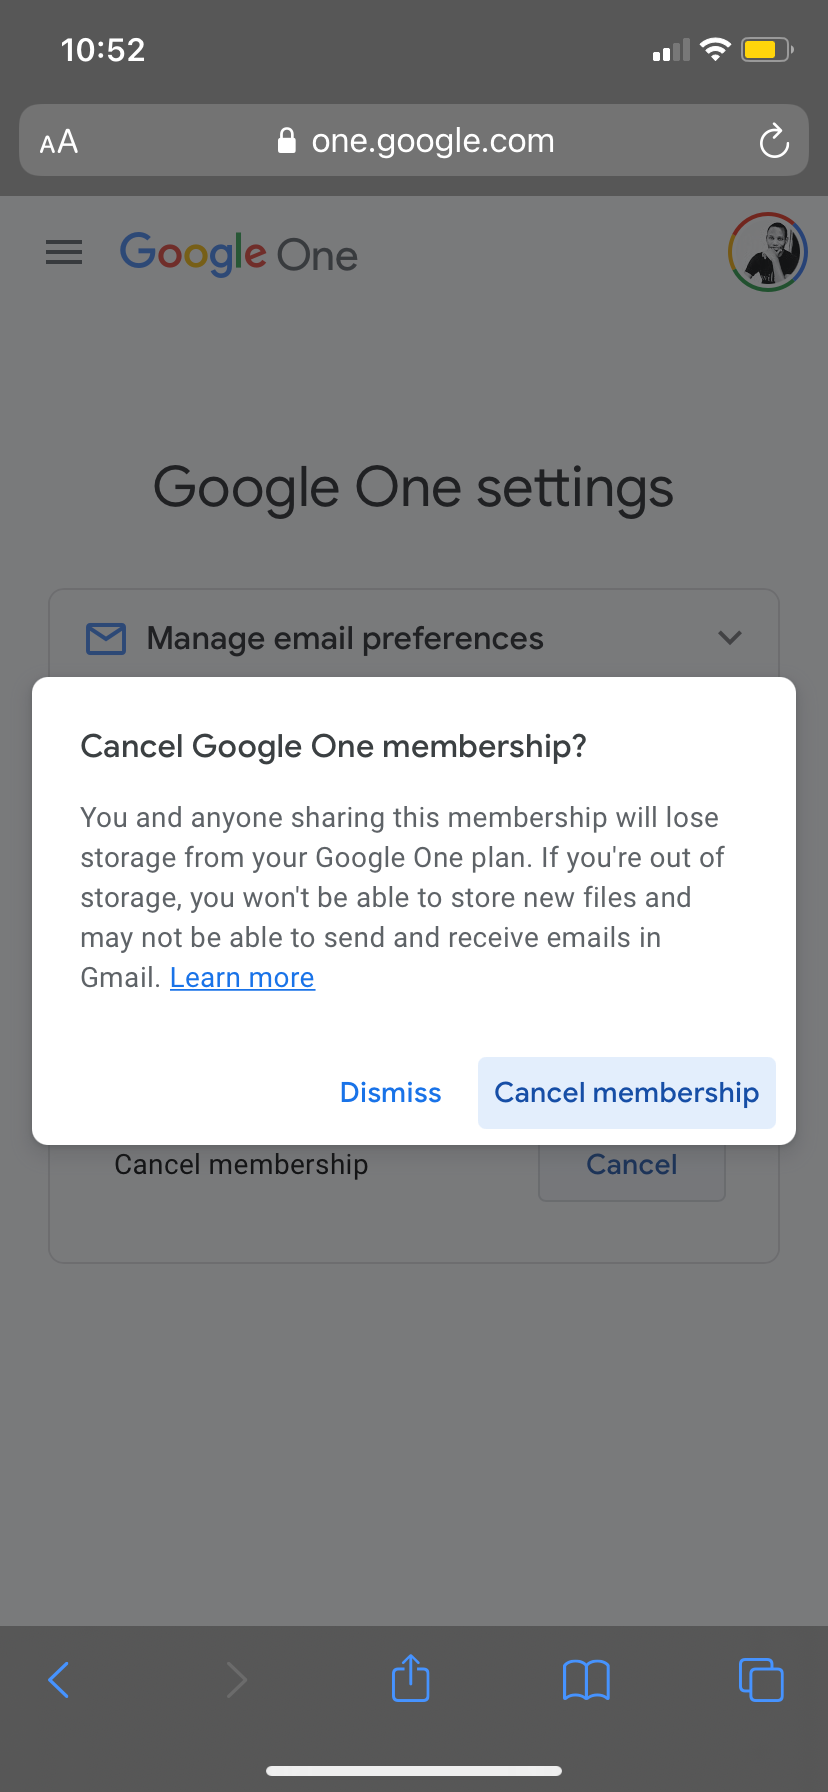 Cancelling Google One on iOS via browser